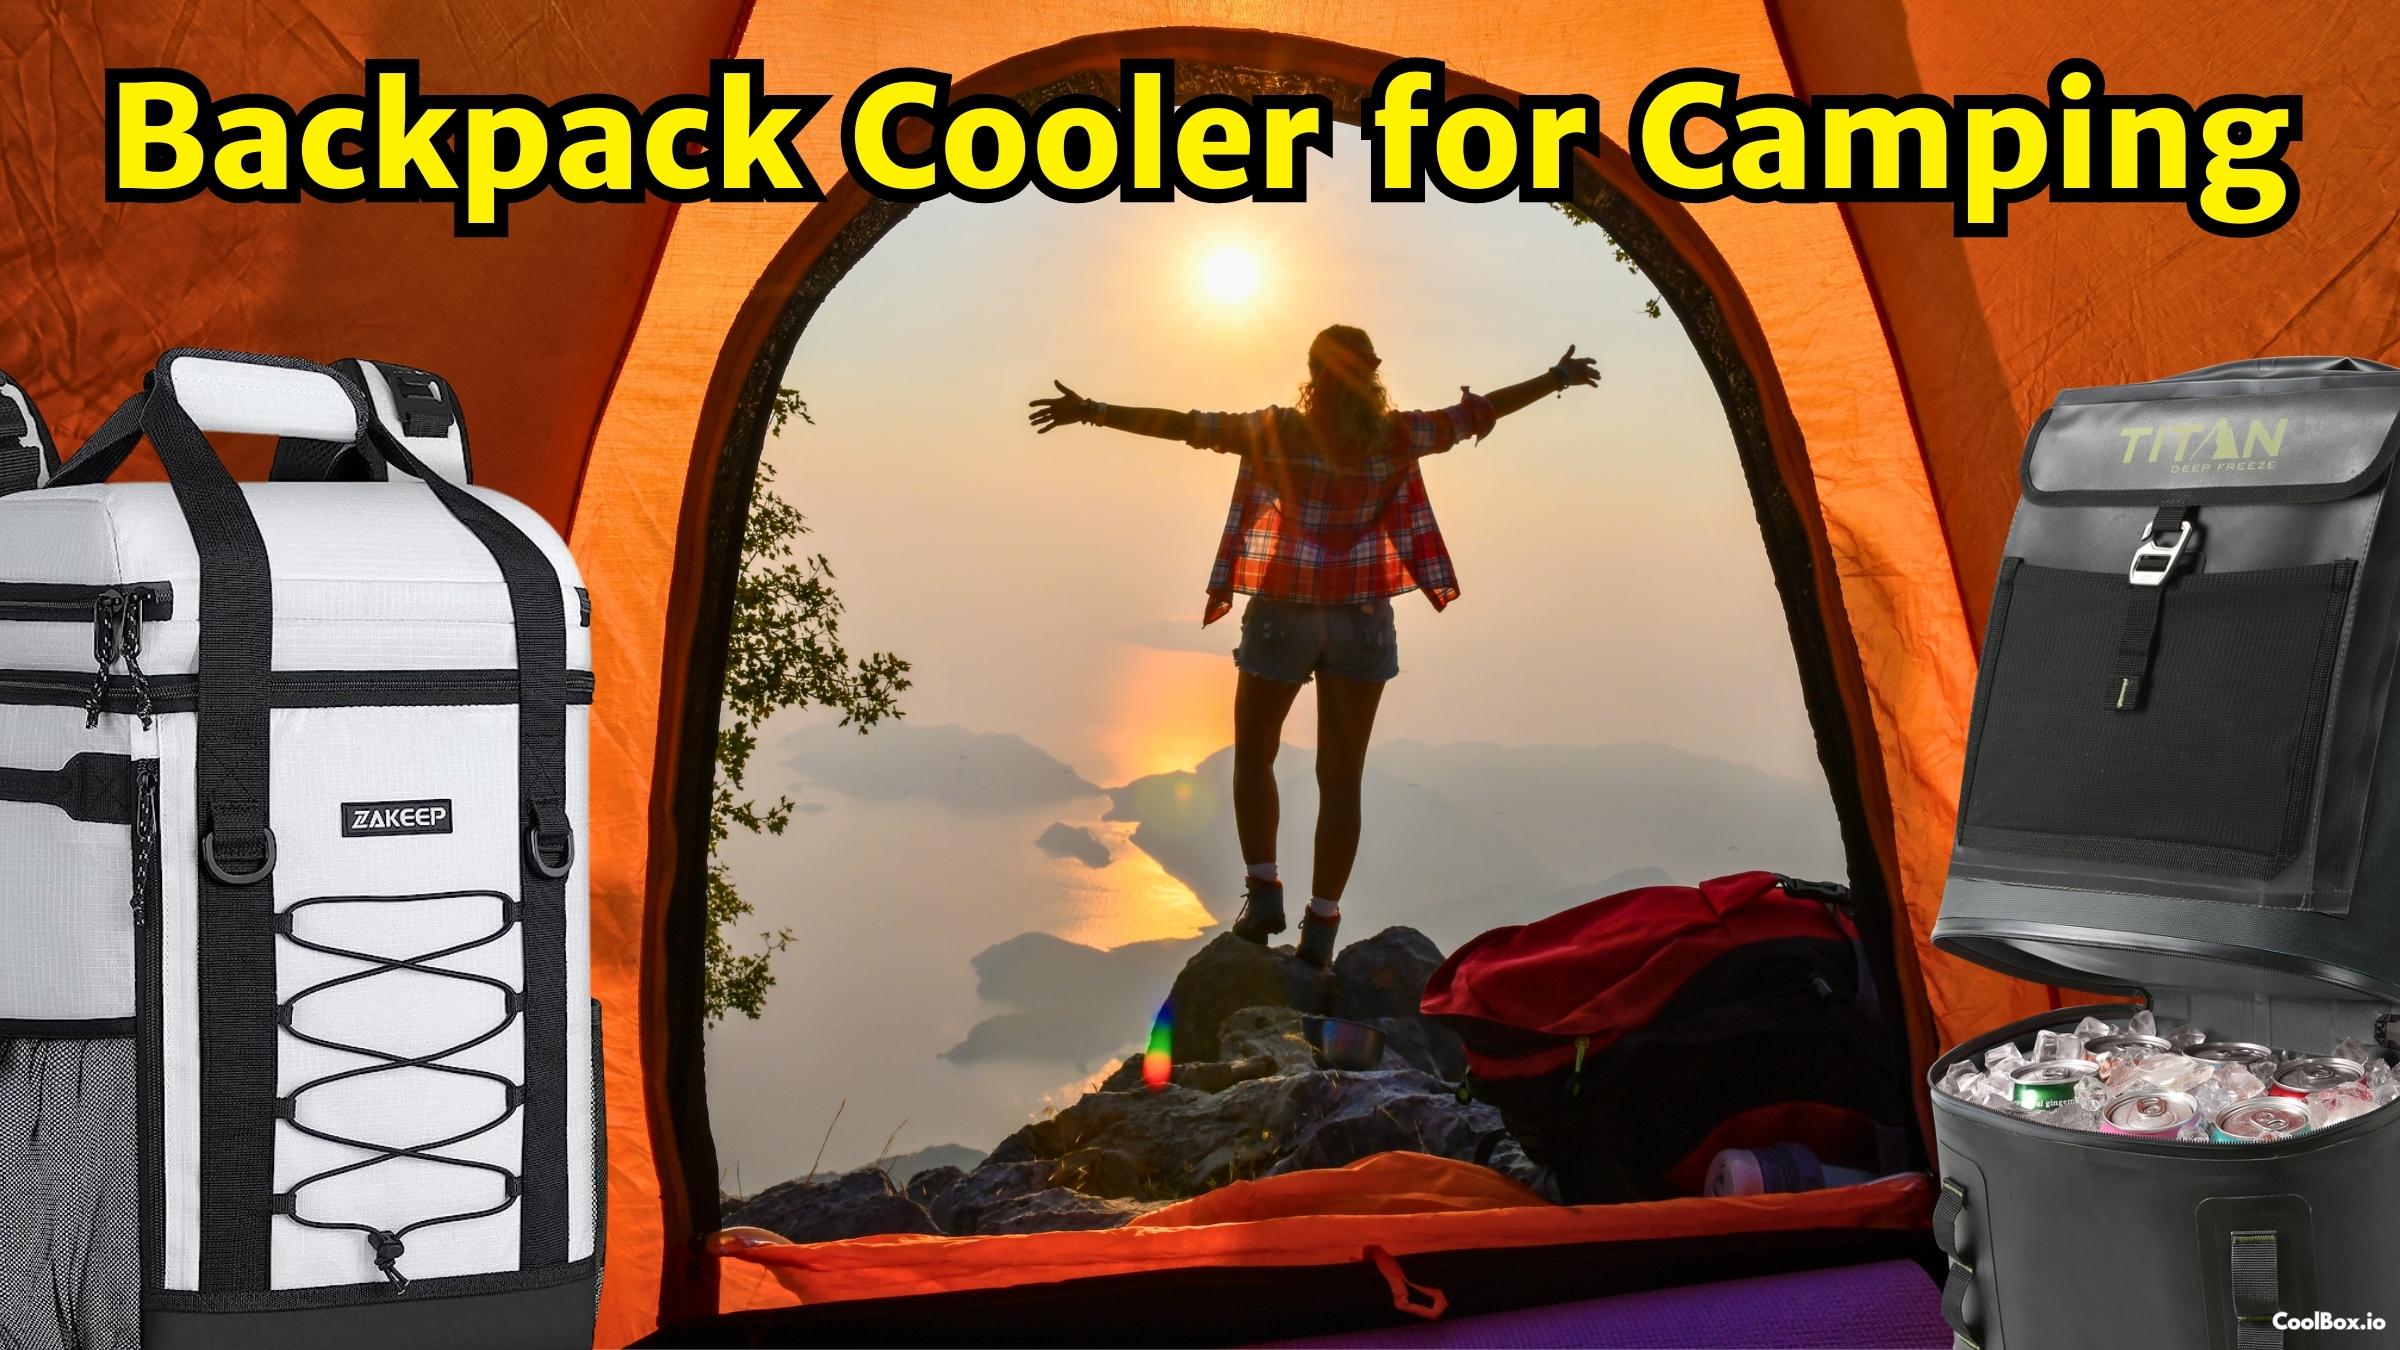 Can You Take A Backpack Cooler Box For Camping?